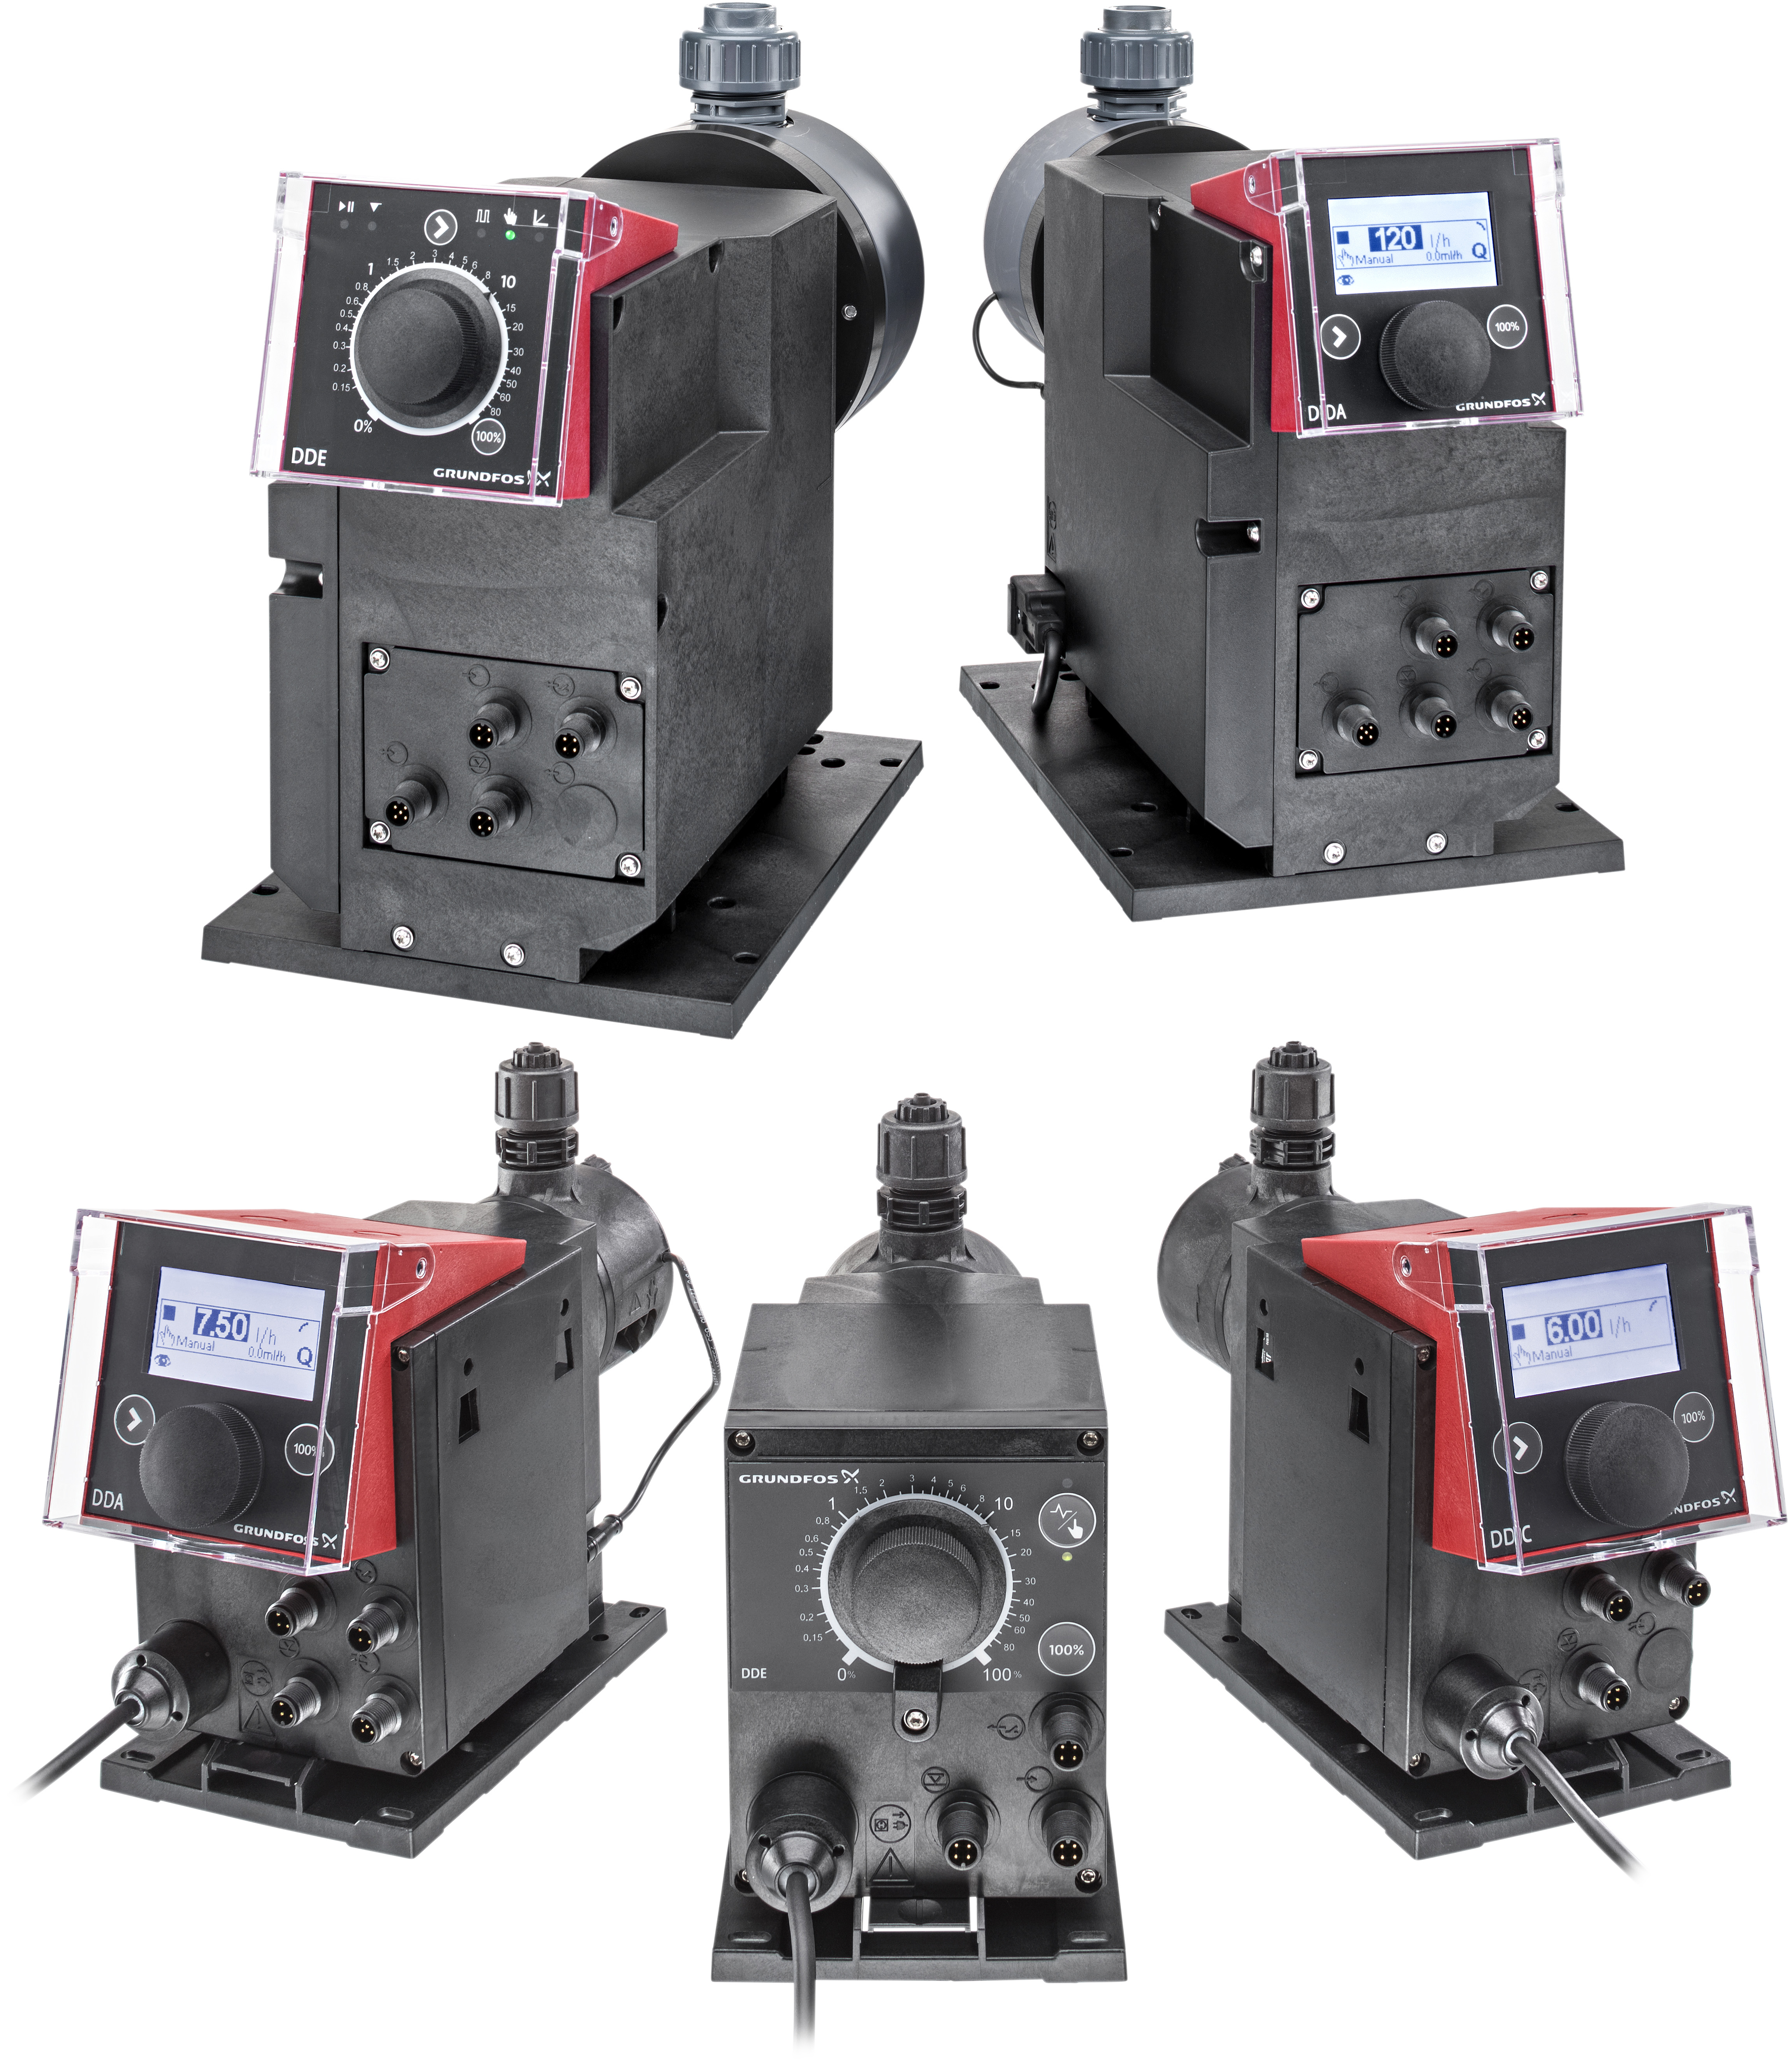 Grundfos hopes that the pumps will extend the performance of the Grundfos Smart Digital range.